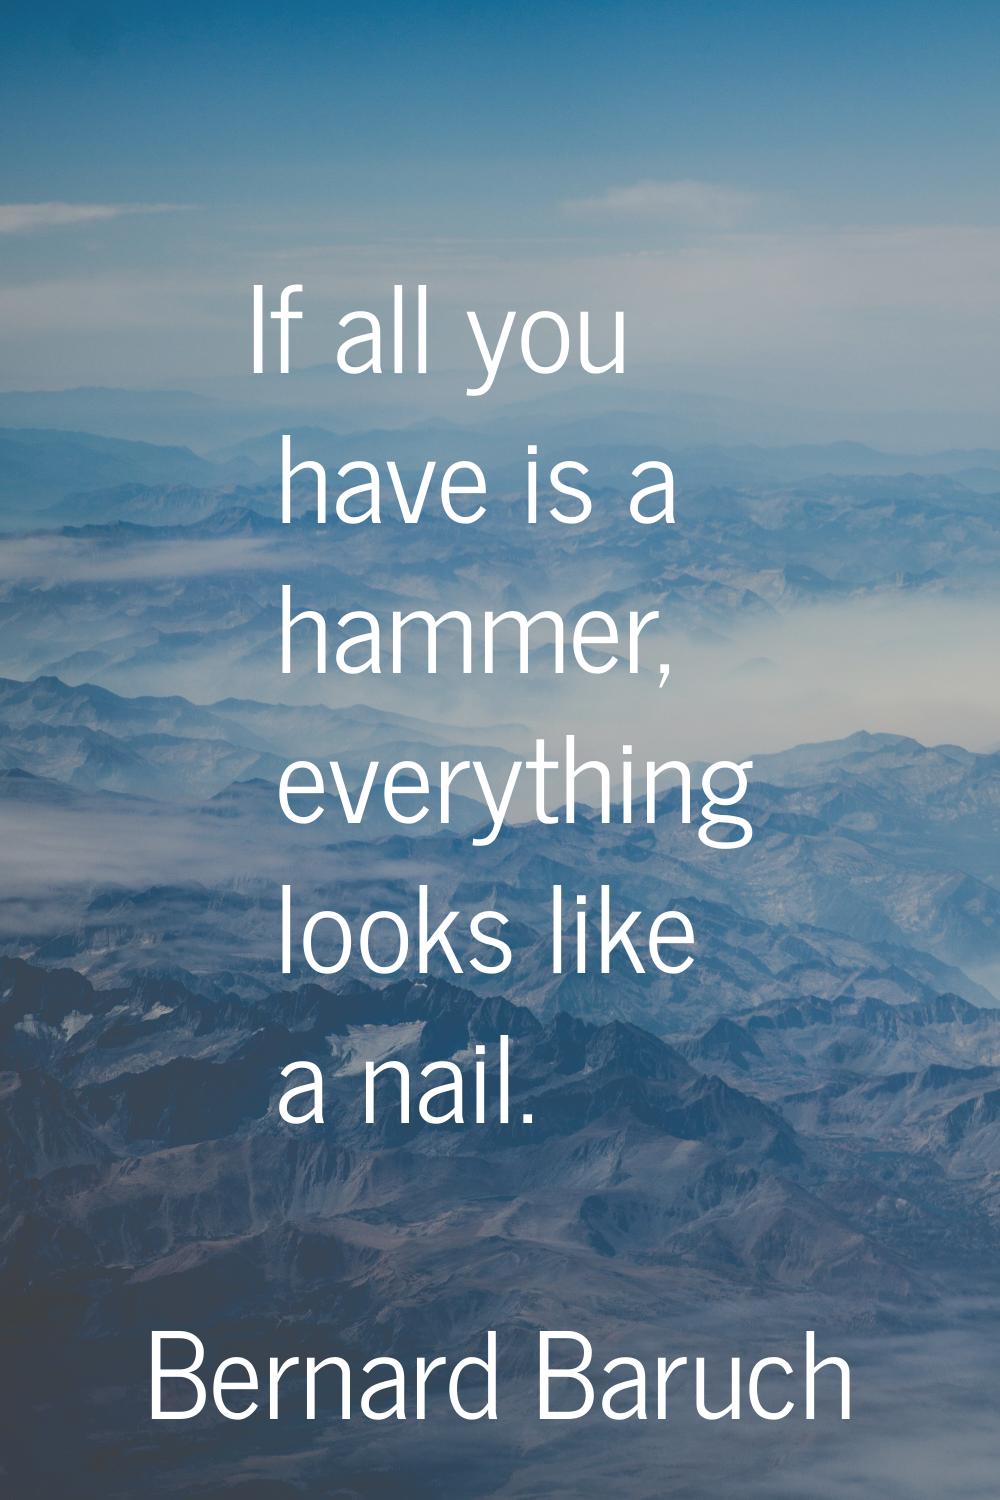 If all you have is a hammer, everything looks like a nail.